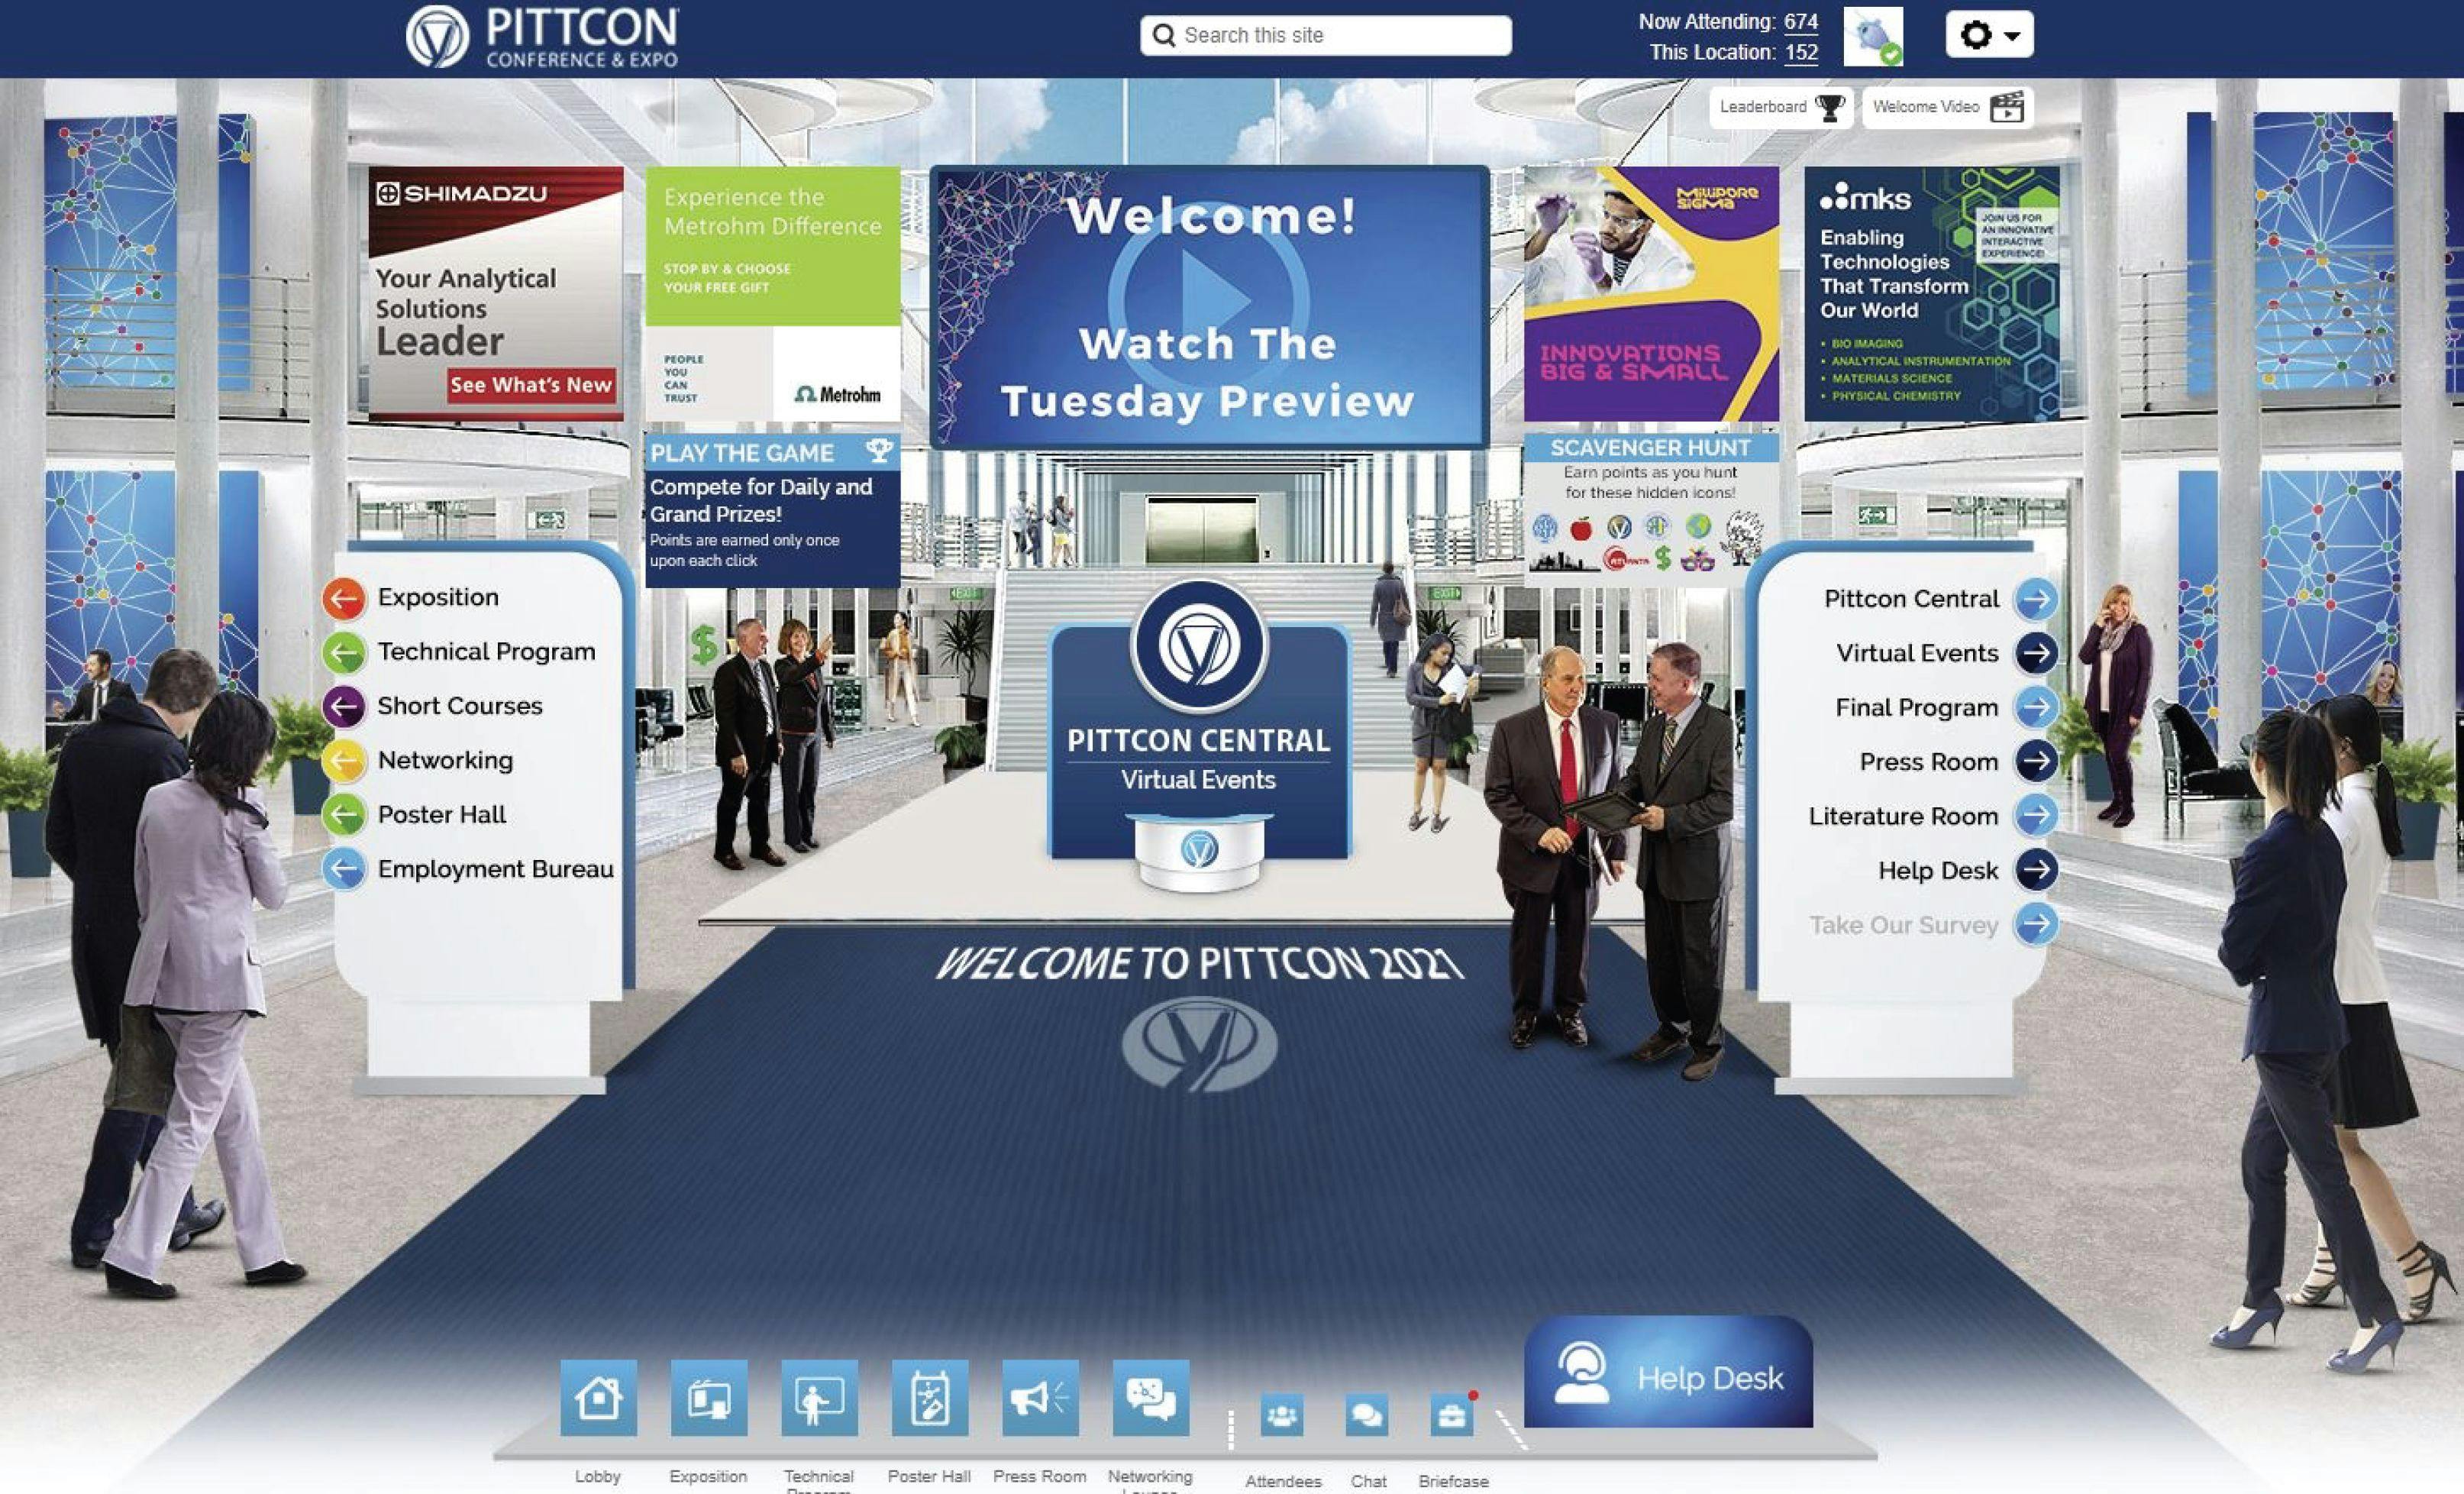 FIGURE 3: The landing page (main menu) of the web-based platform allowing quick navigation to all venues and events at Pittcon 2021.